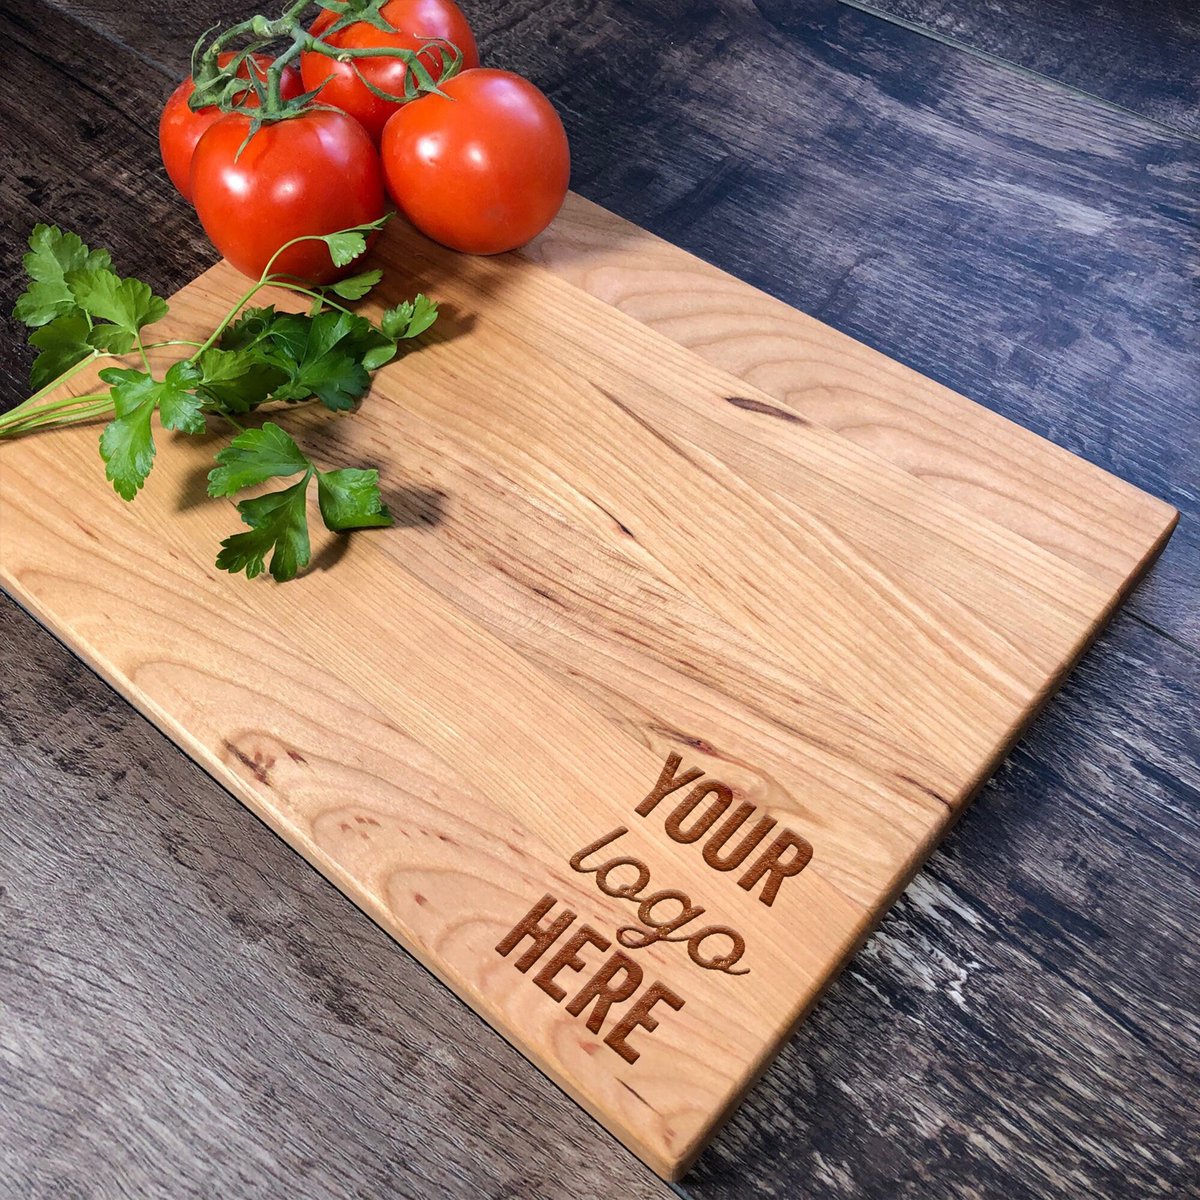 Personalized Cutting Board - Corporate Gift, Client Gift, Employee Gift, Customer Gift, Company Gift, Realtor Gift, Your Logo Engraved #35 etsy.me/3n3nPLw #wood #personalized #cuttingboard #engraved #corporategift #clientgift #customergift #realtorgift #employe